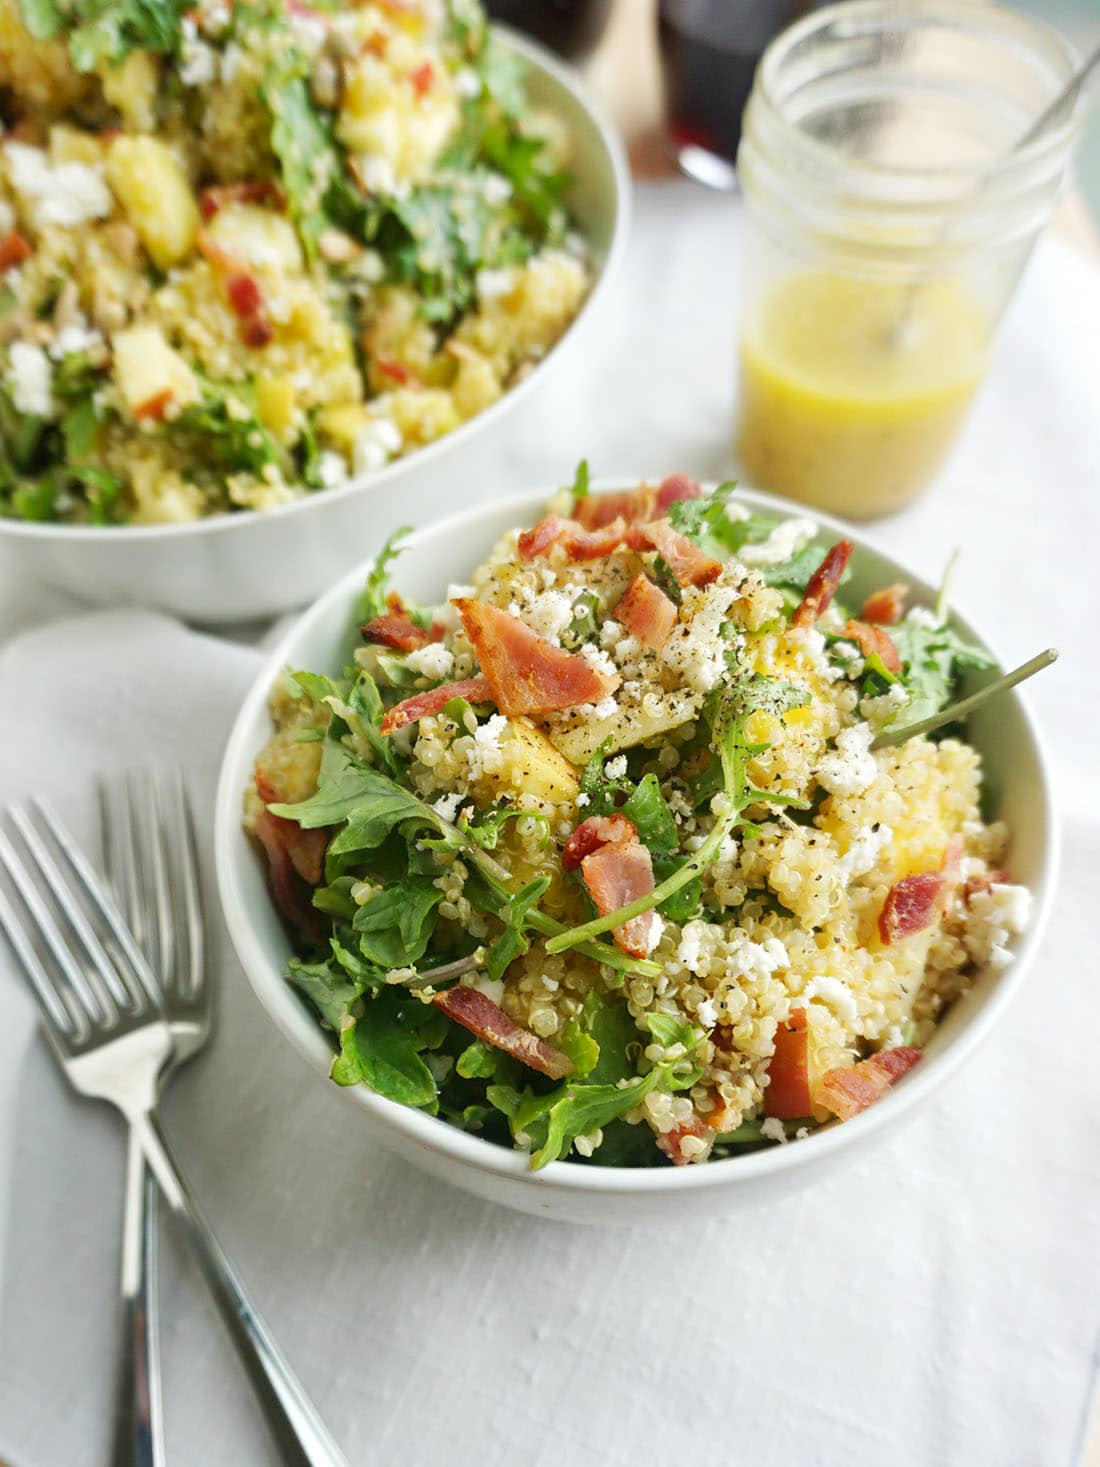 Bacon Quinoa Salad with Lemon Dijon Dressing in a bowl with two forks beside, dijon dressing in a jar with a spoon and a serving dish full of the rest of the salad in the background